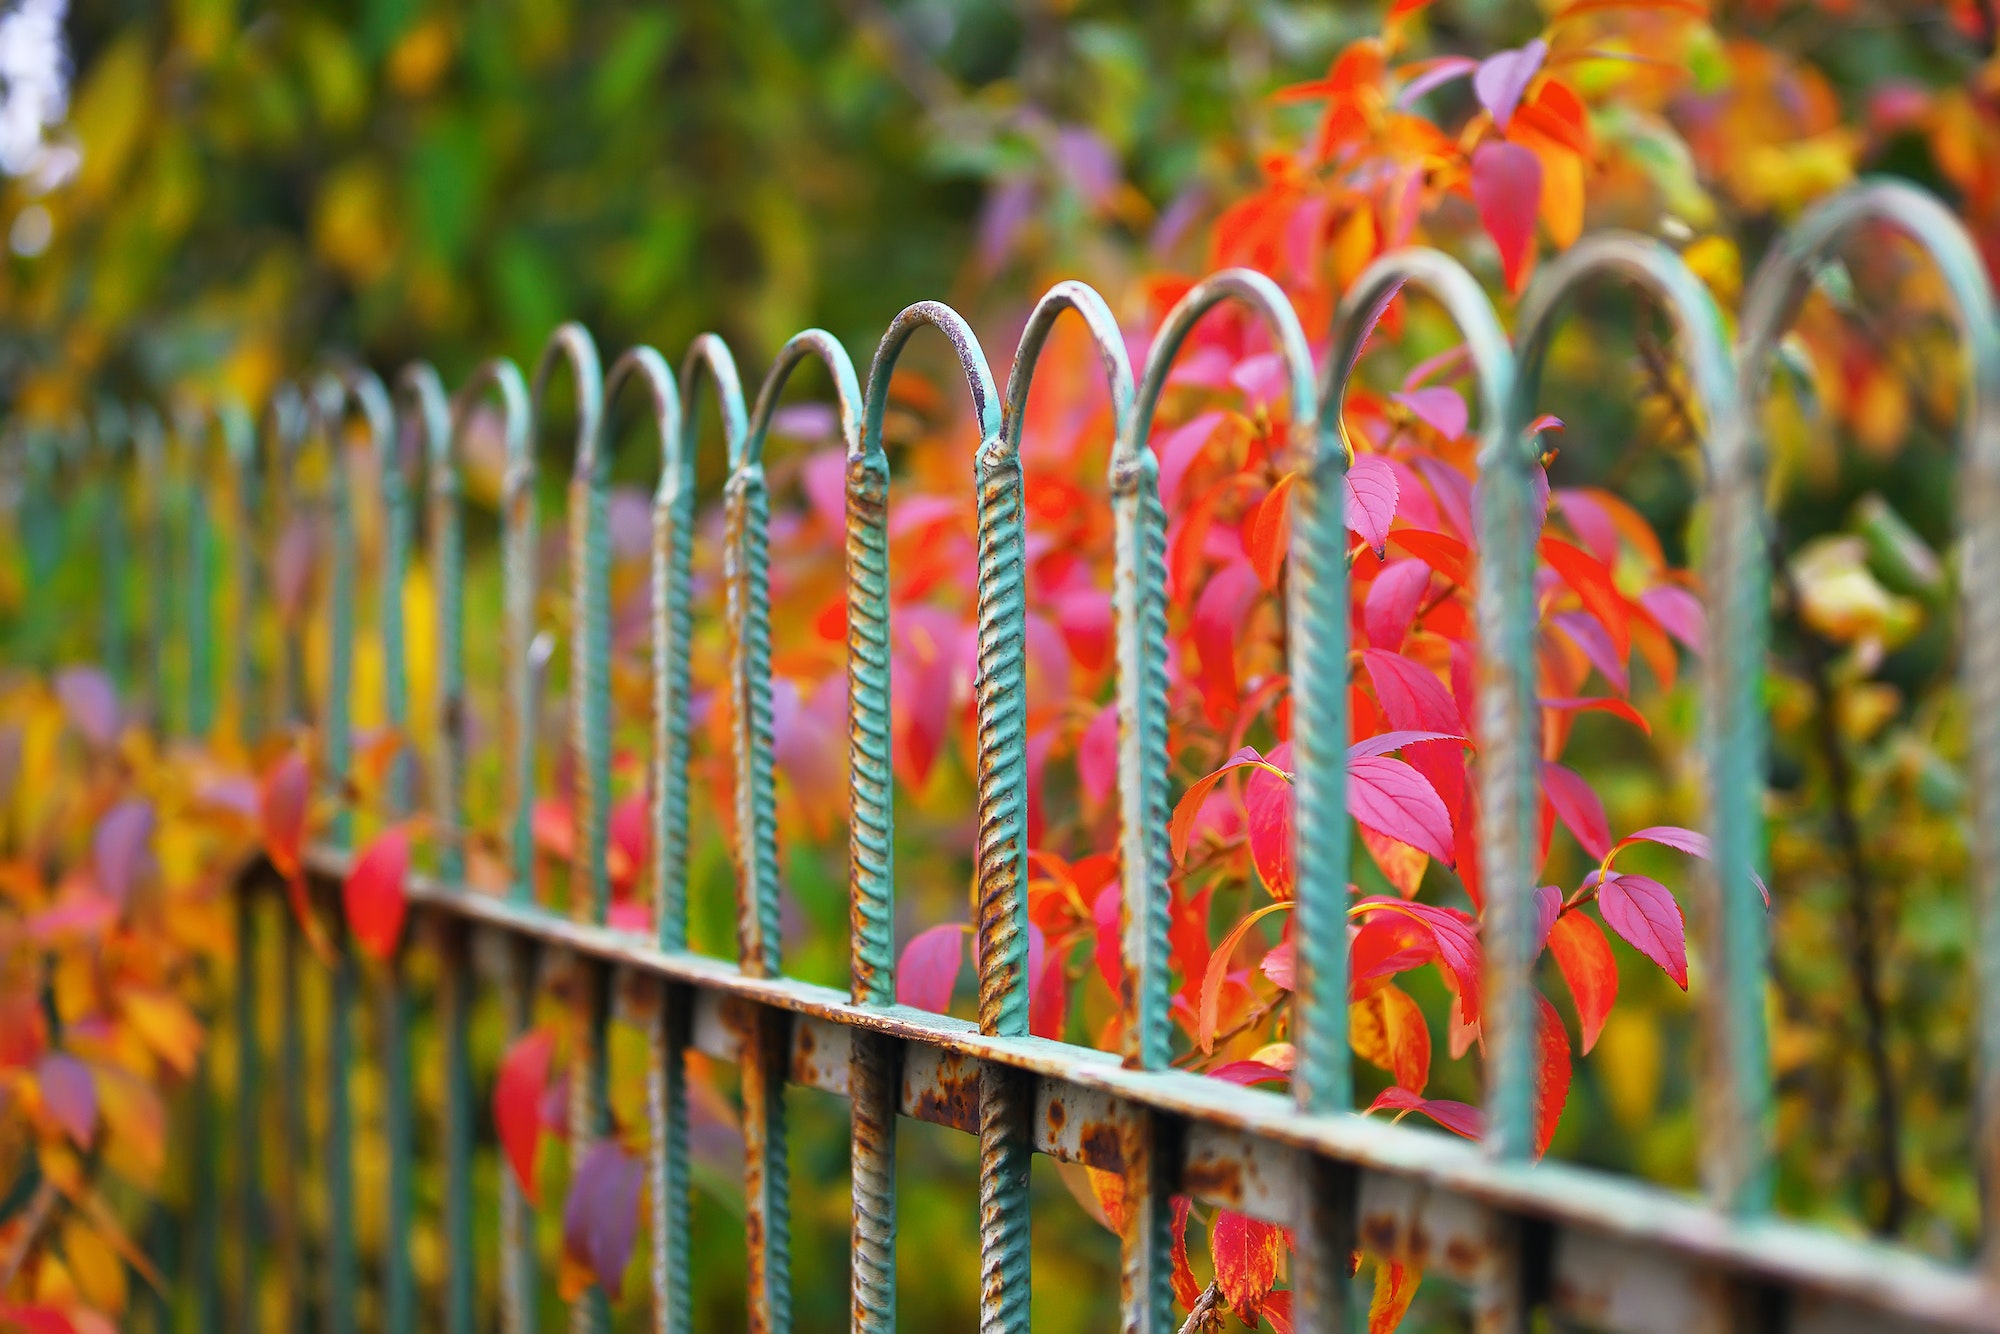 Detail of garden fence with colorful vegetation